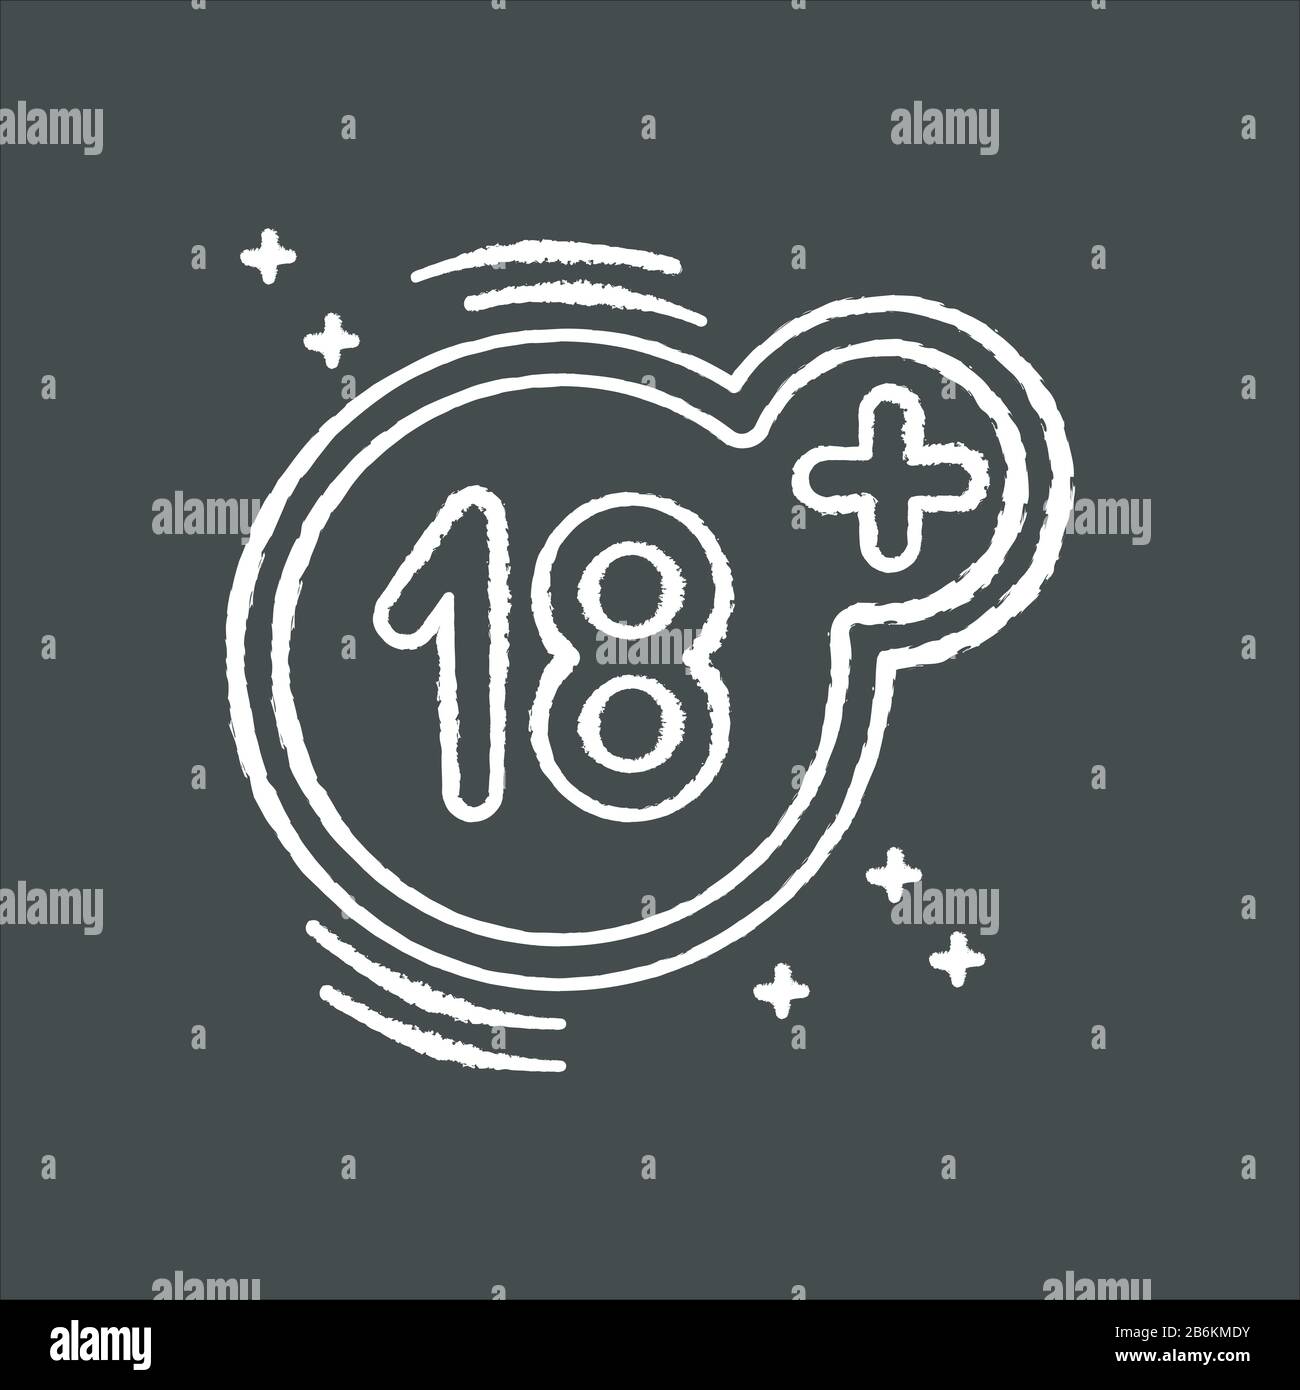 Eighteen plus chalk white icon on black background. Adults only, 18 years old, age restriction. Mature content warning, prohibition sign with number Stock Vector